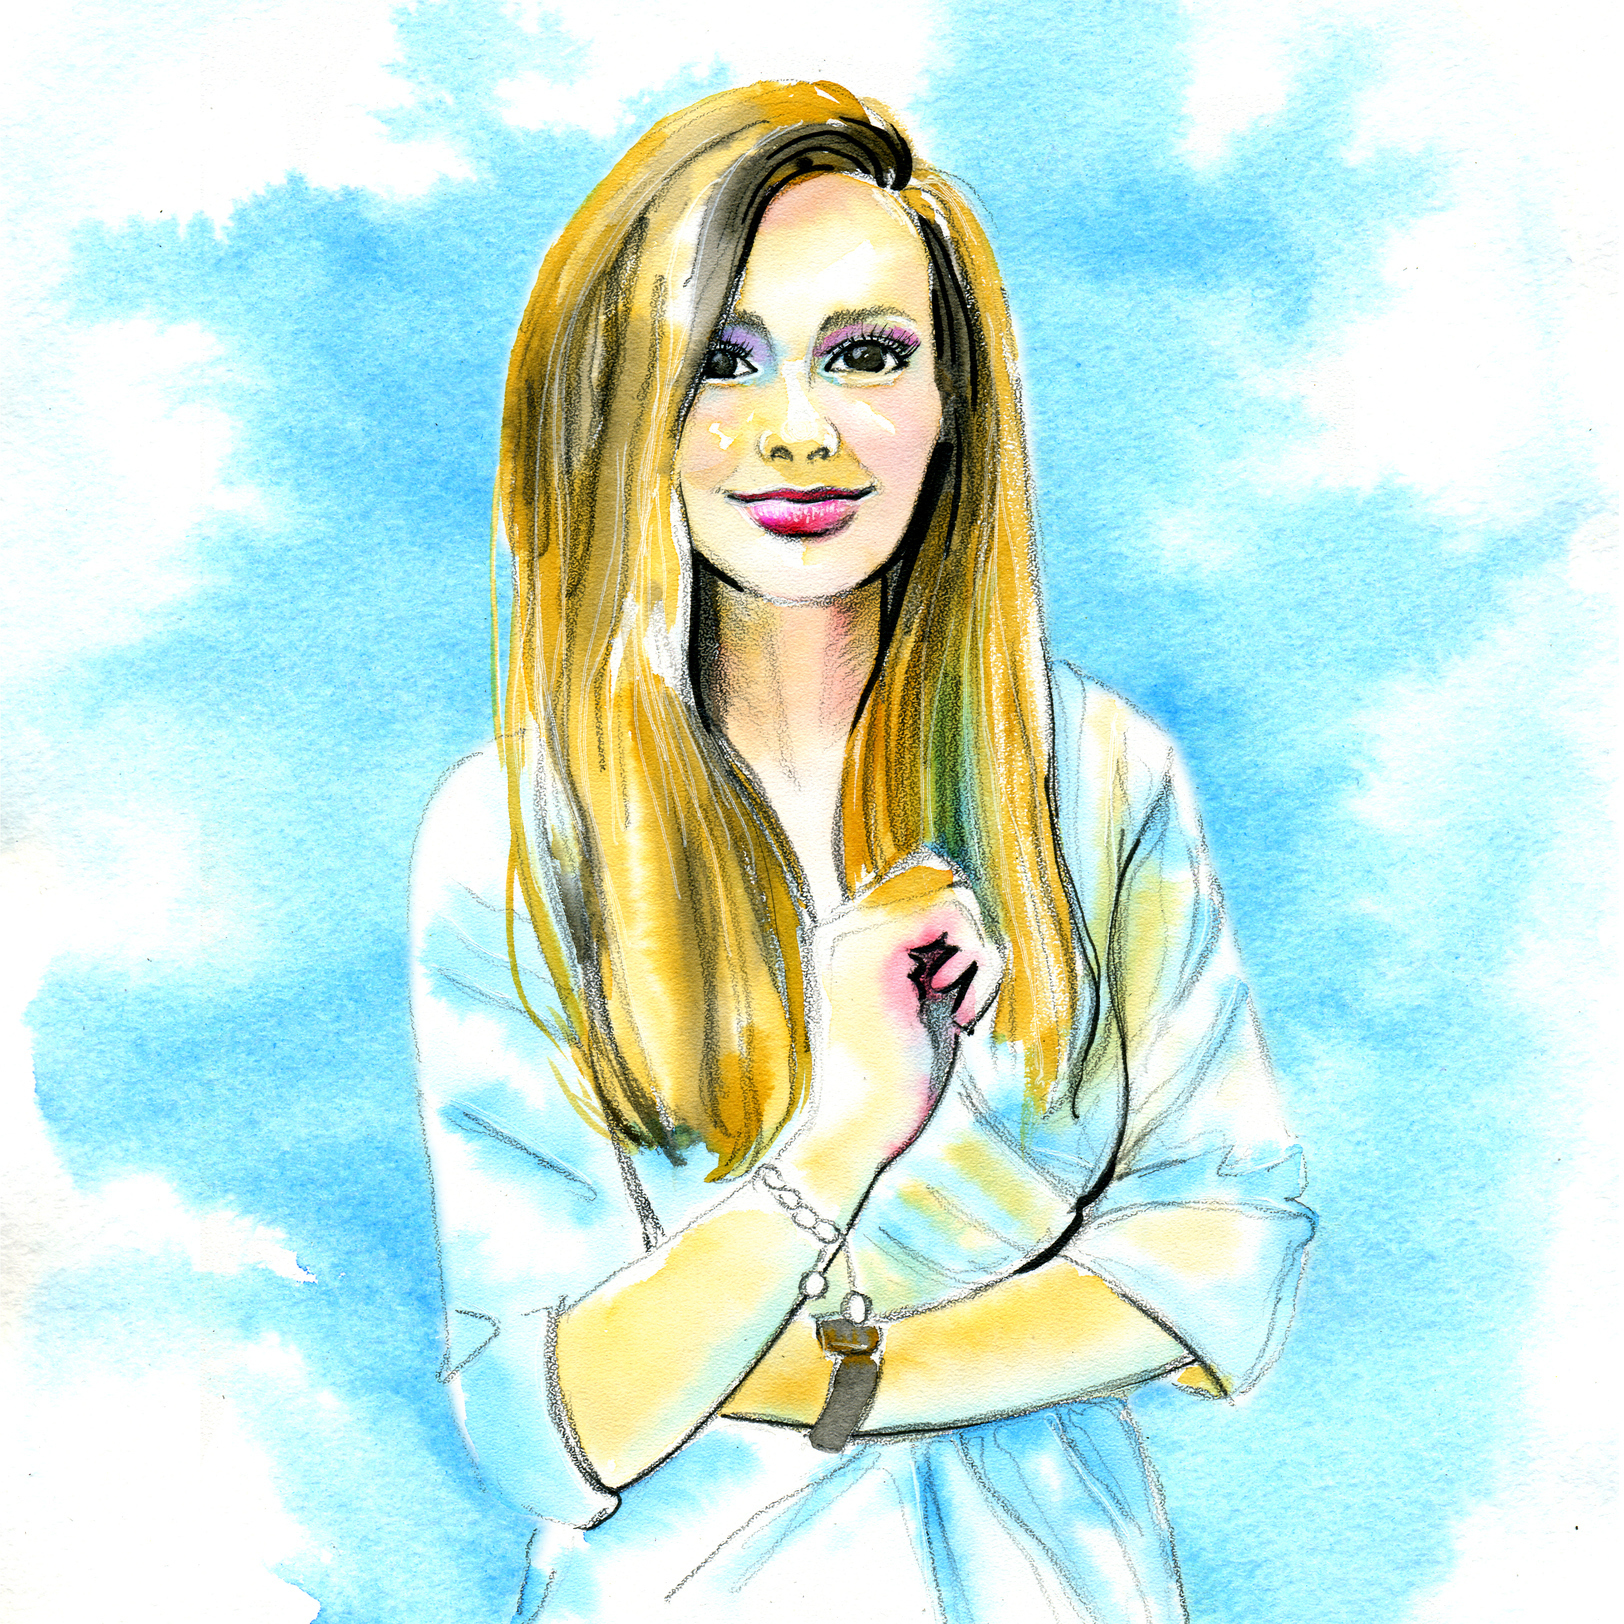 watercolor illustration of a woman against a blue background